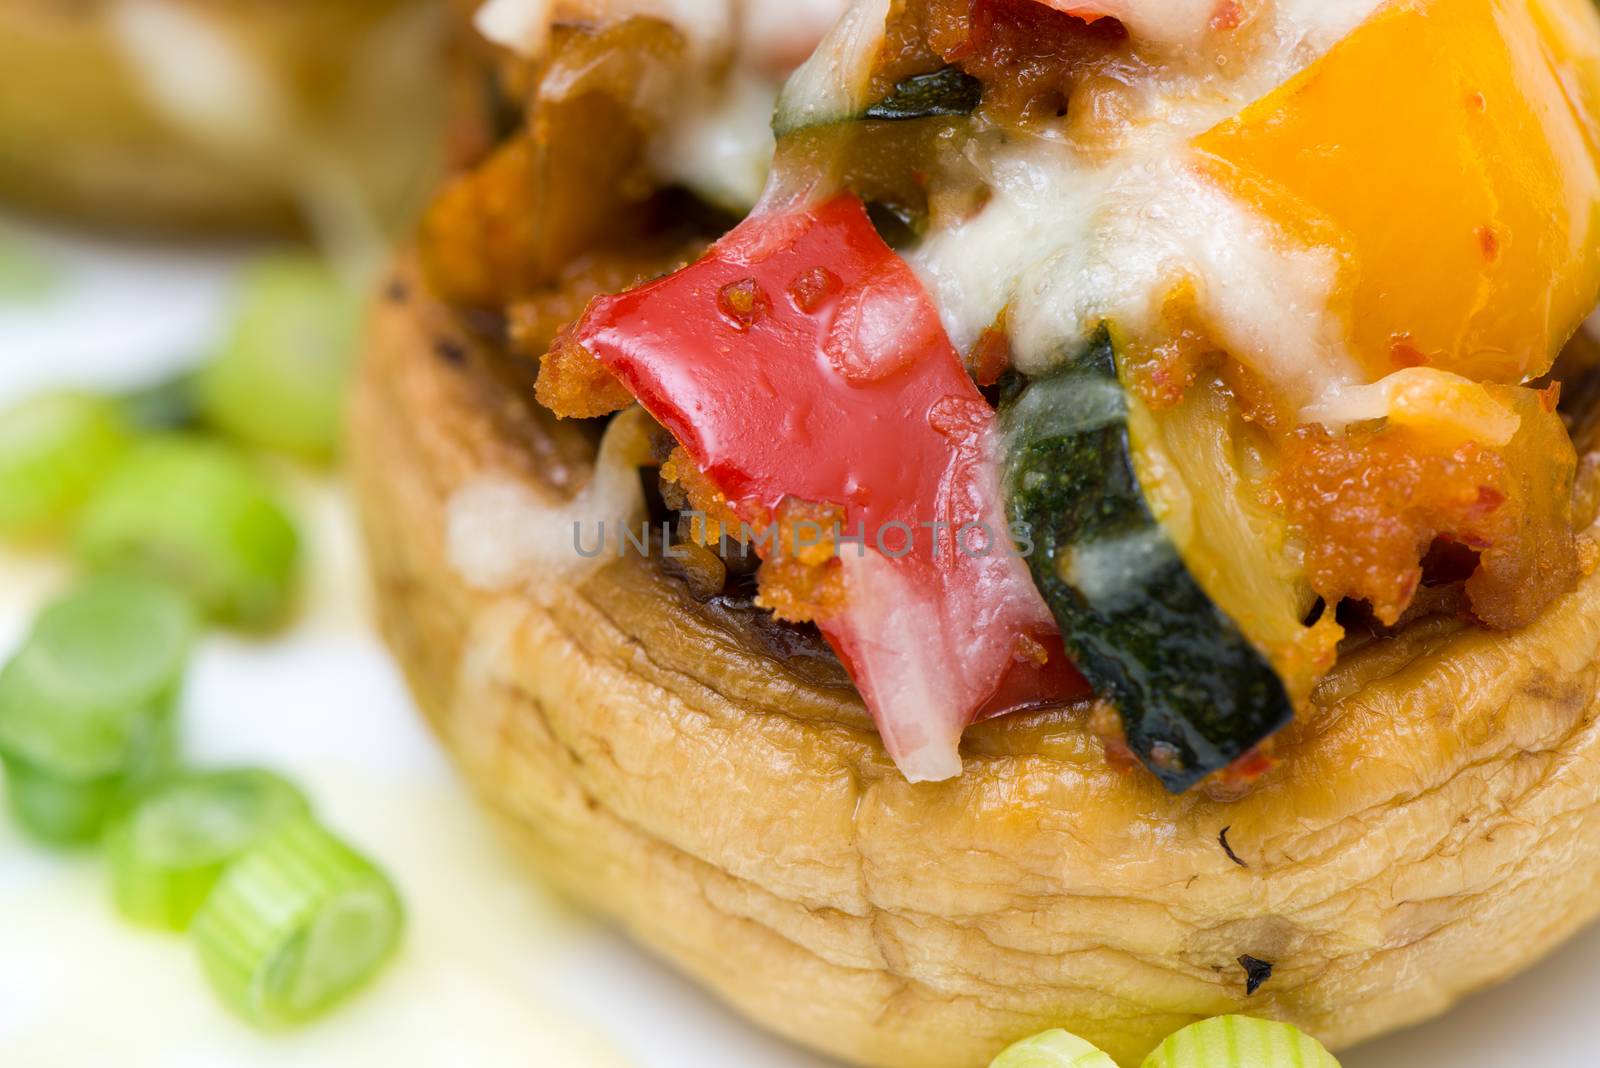 Mushrooms stuffed with vegetables and cheese on white plate fork and knife